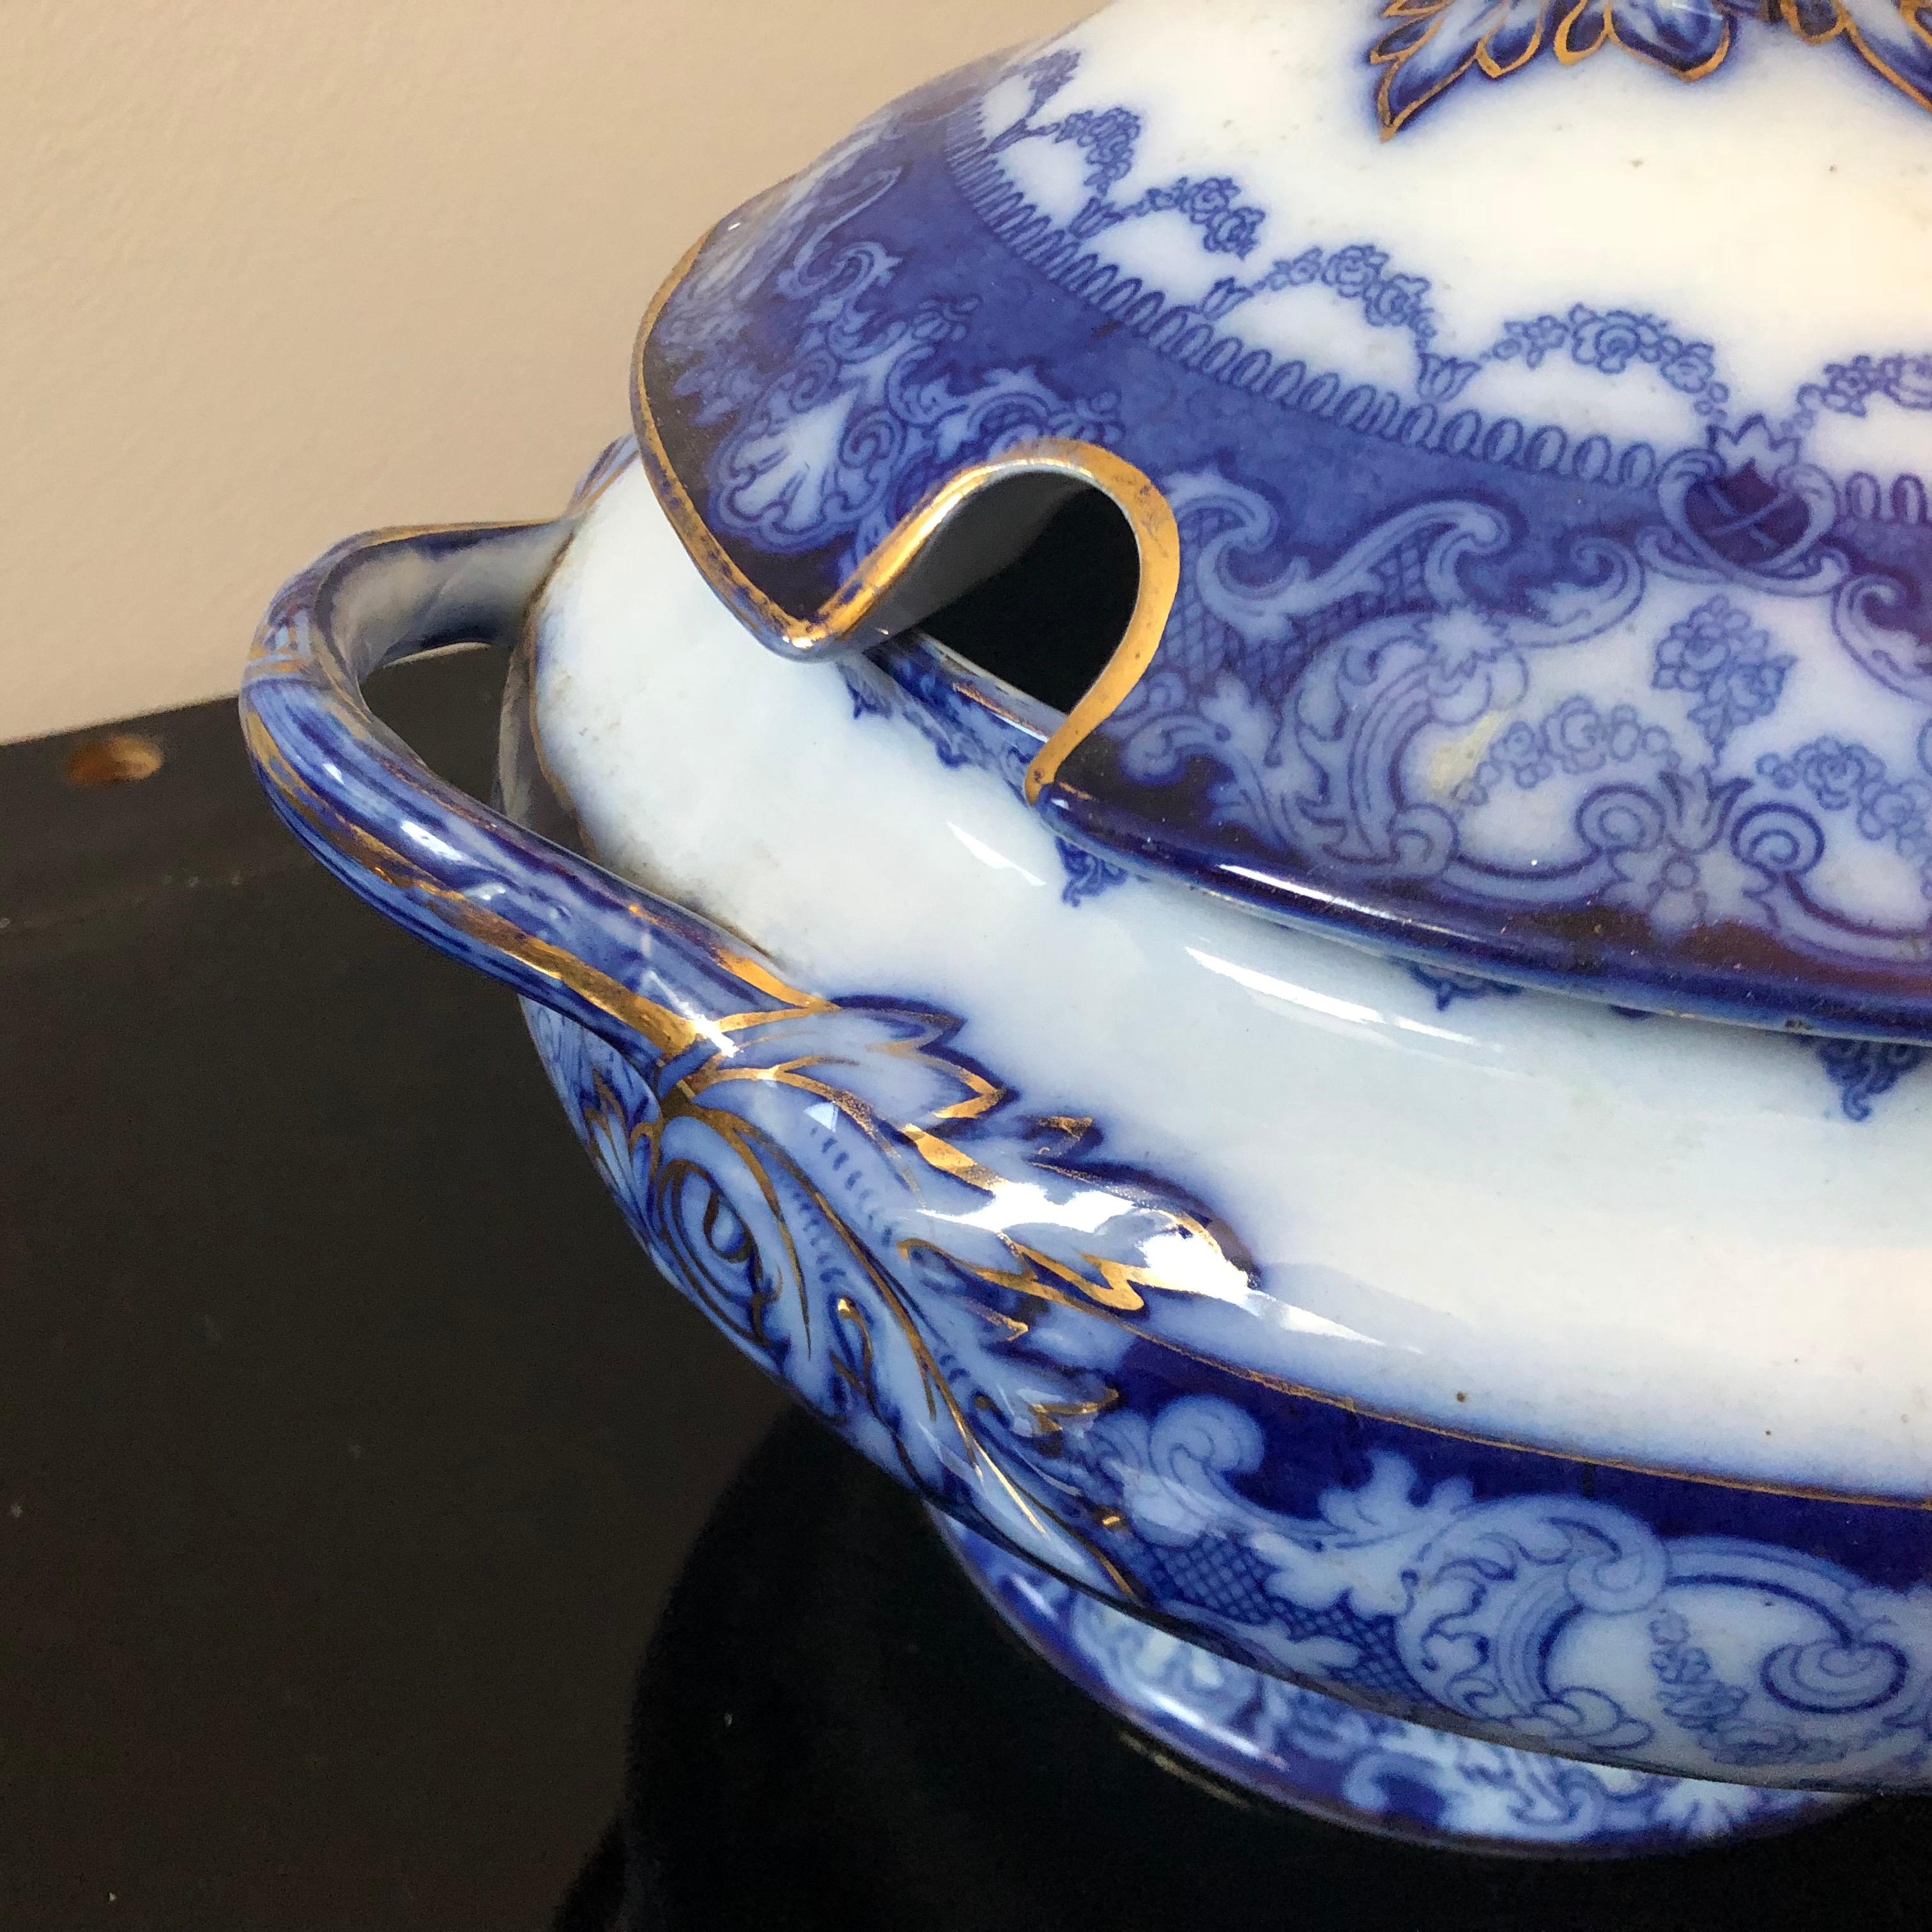 A white and blue decorated porcelain tureen in good conditions. Made in England in the Victorian period.